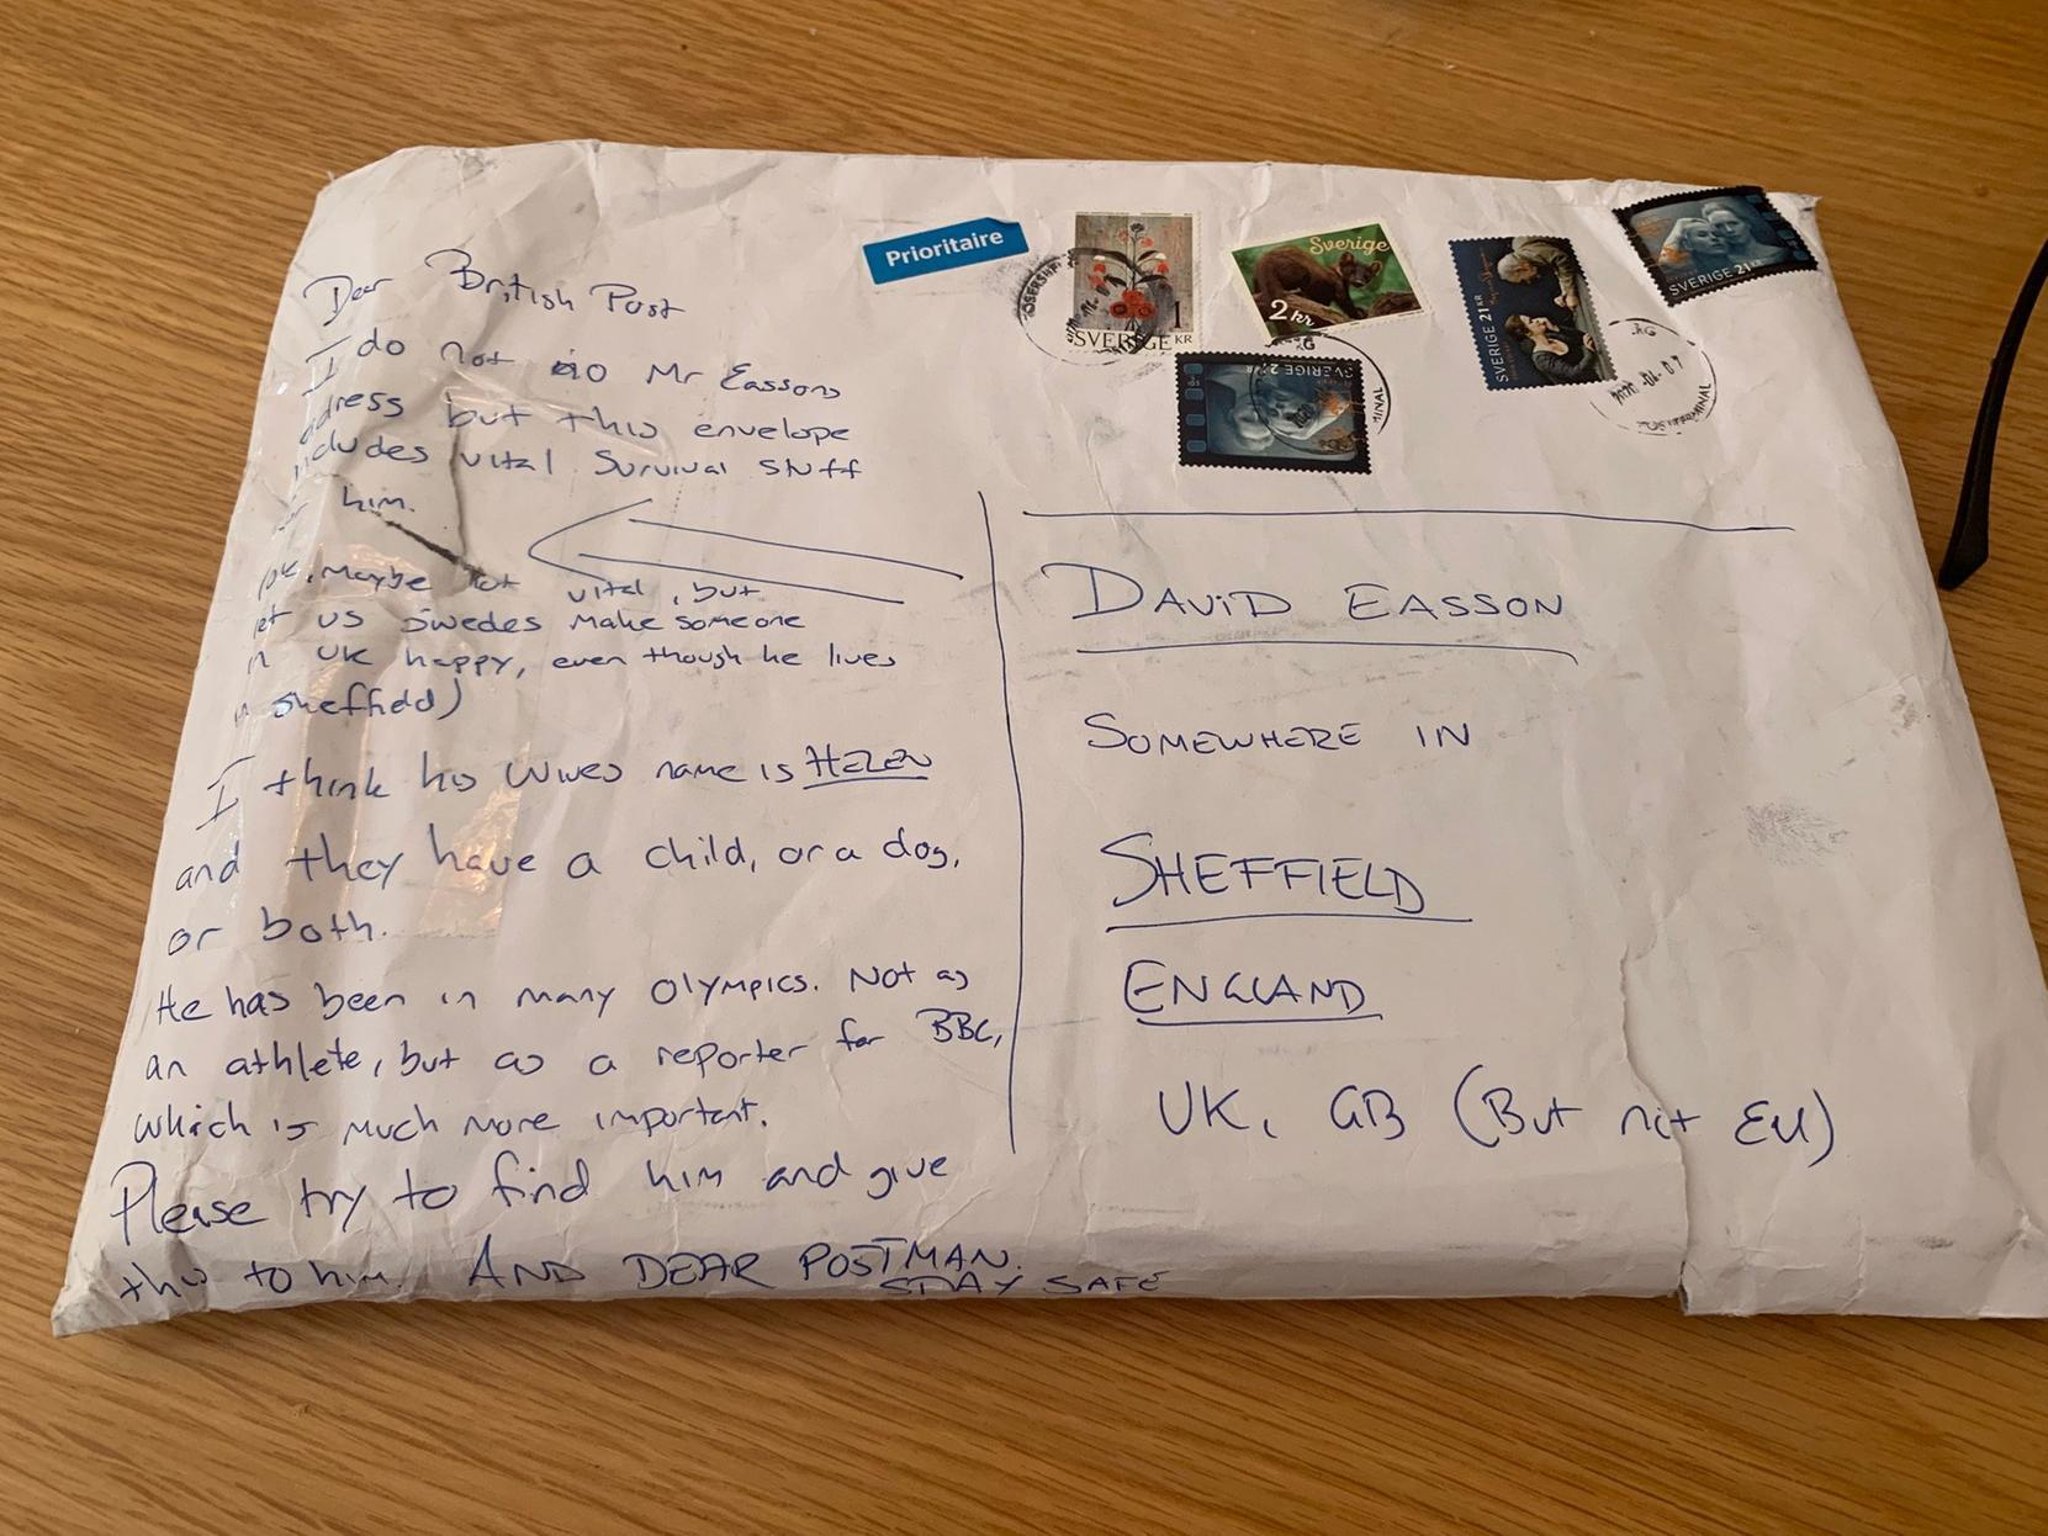 How To Address Envelope In Uk